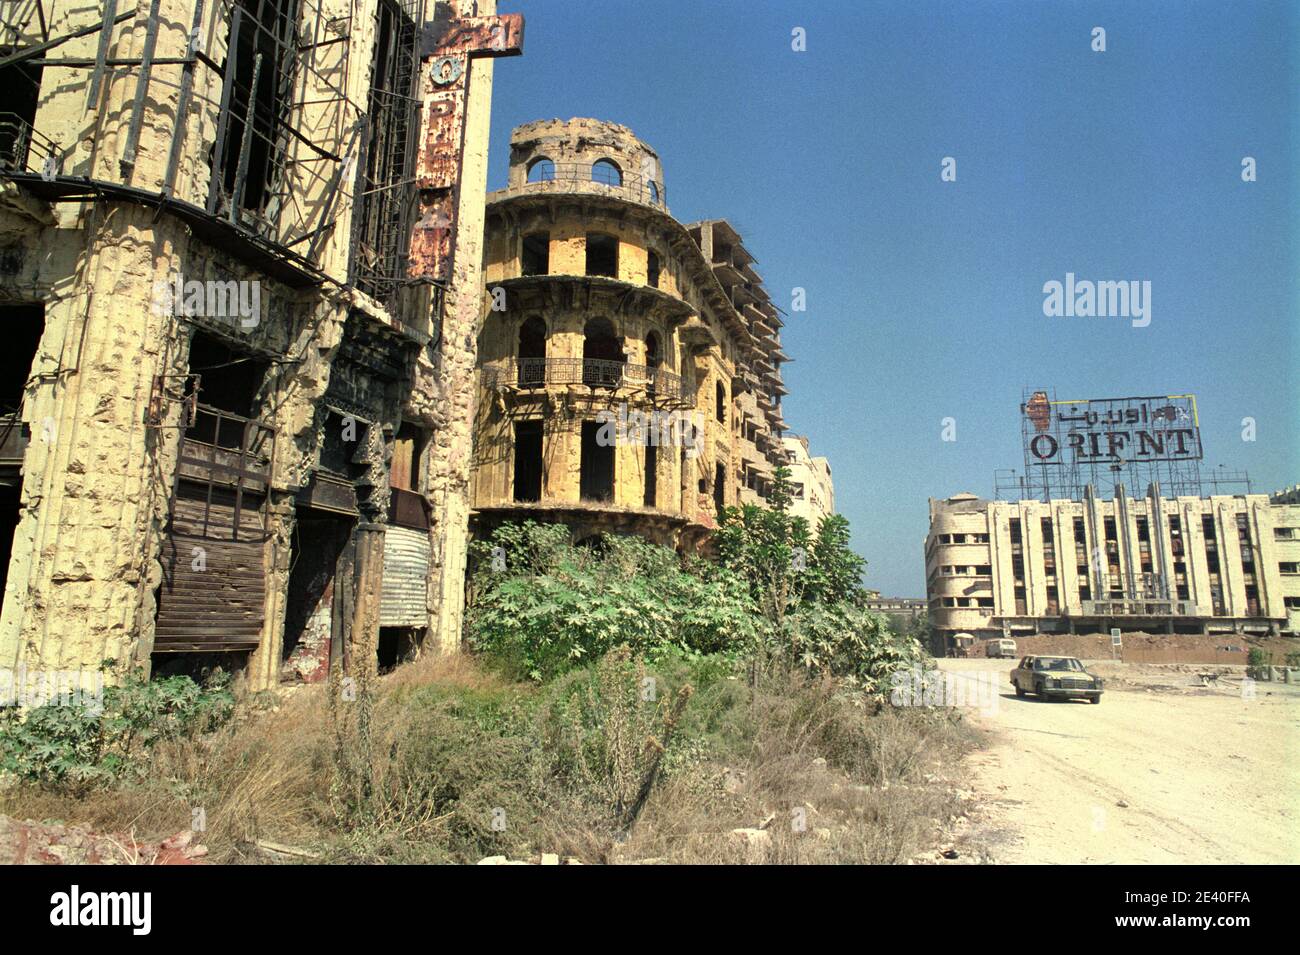 18th September 1993 The battle-scarred 'Cinema Opera' building, Royal Hotel and the Cinema Rivoli in Martyrs’ Square, Beirut. Stock Photo